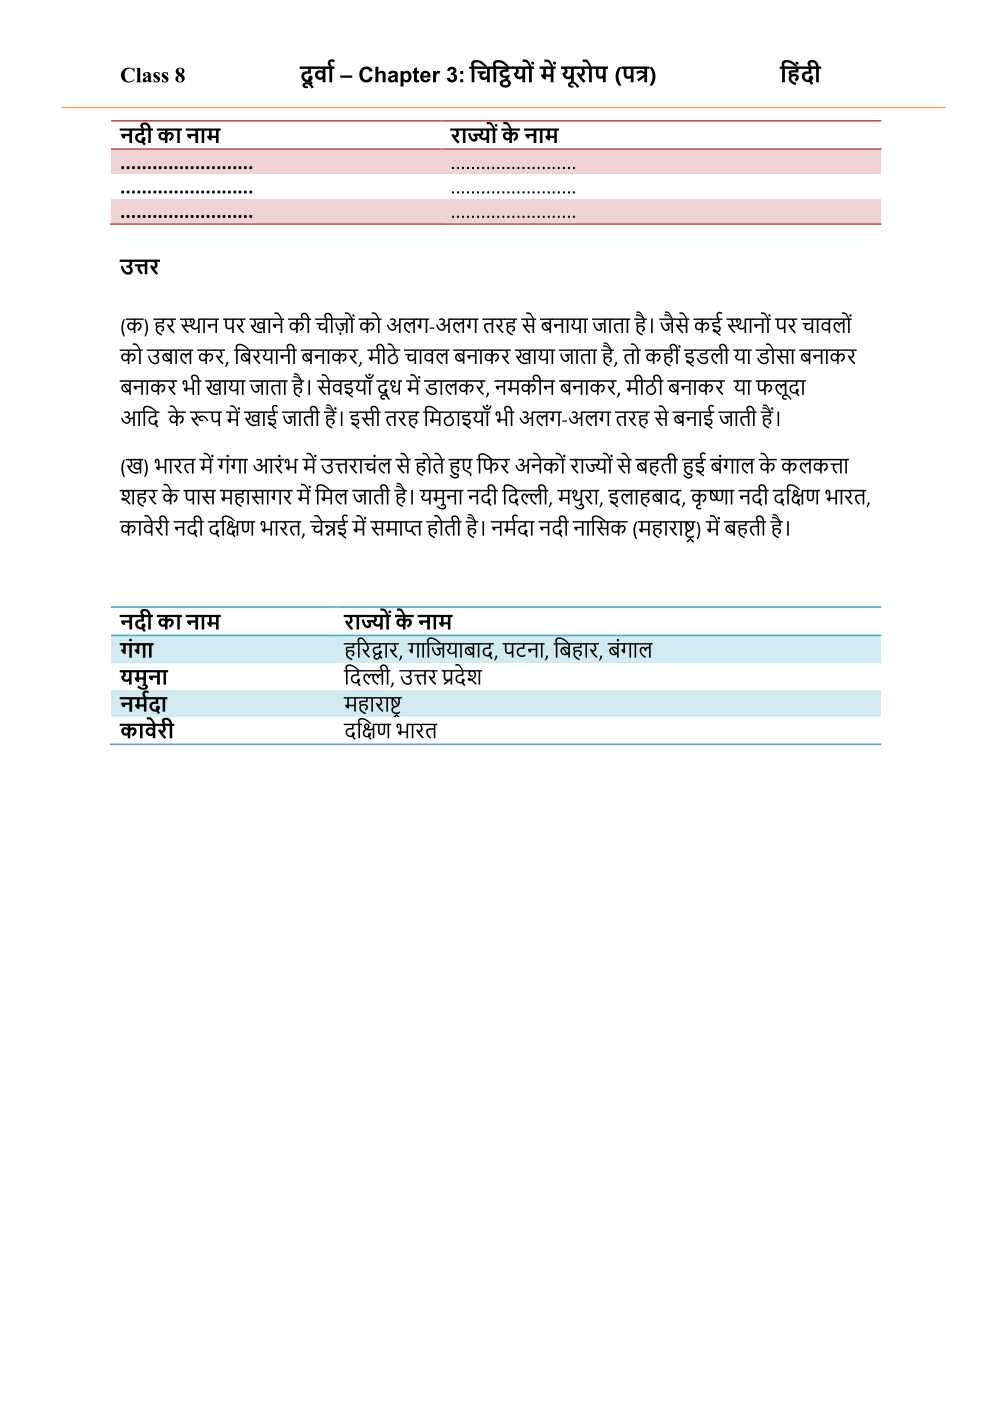 NCERT Solutions For Class 8 Hindi Durva Chapter 3